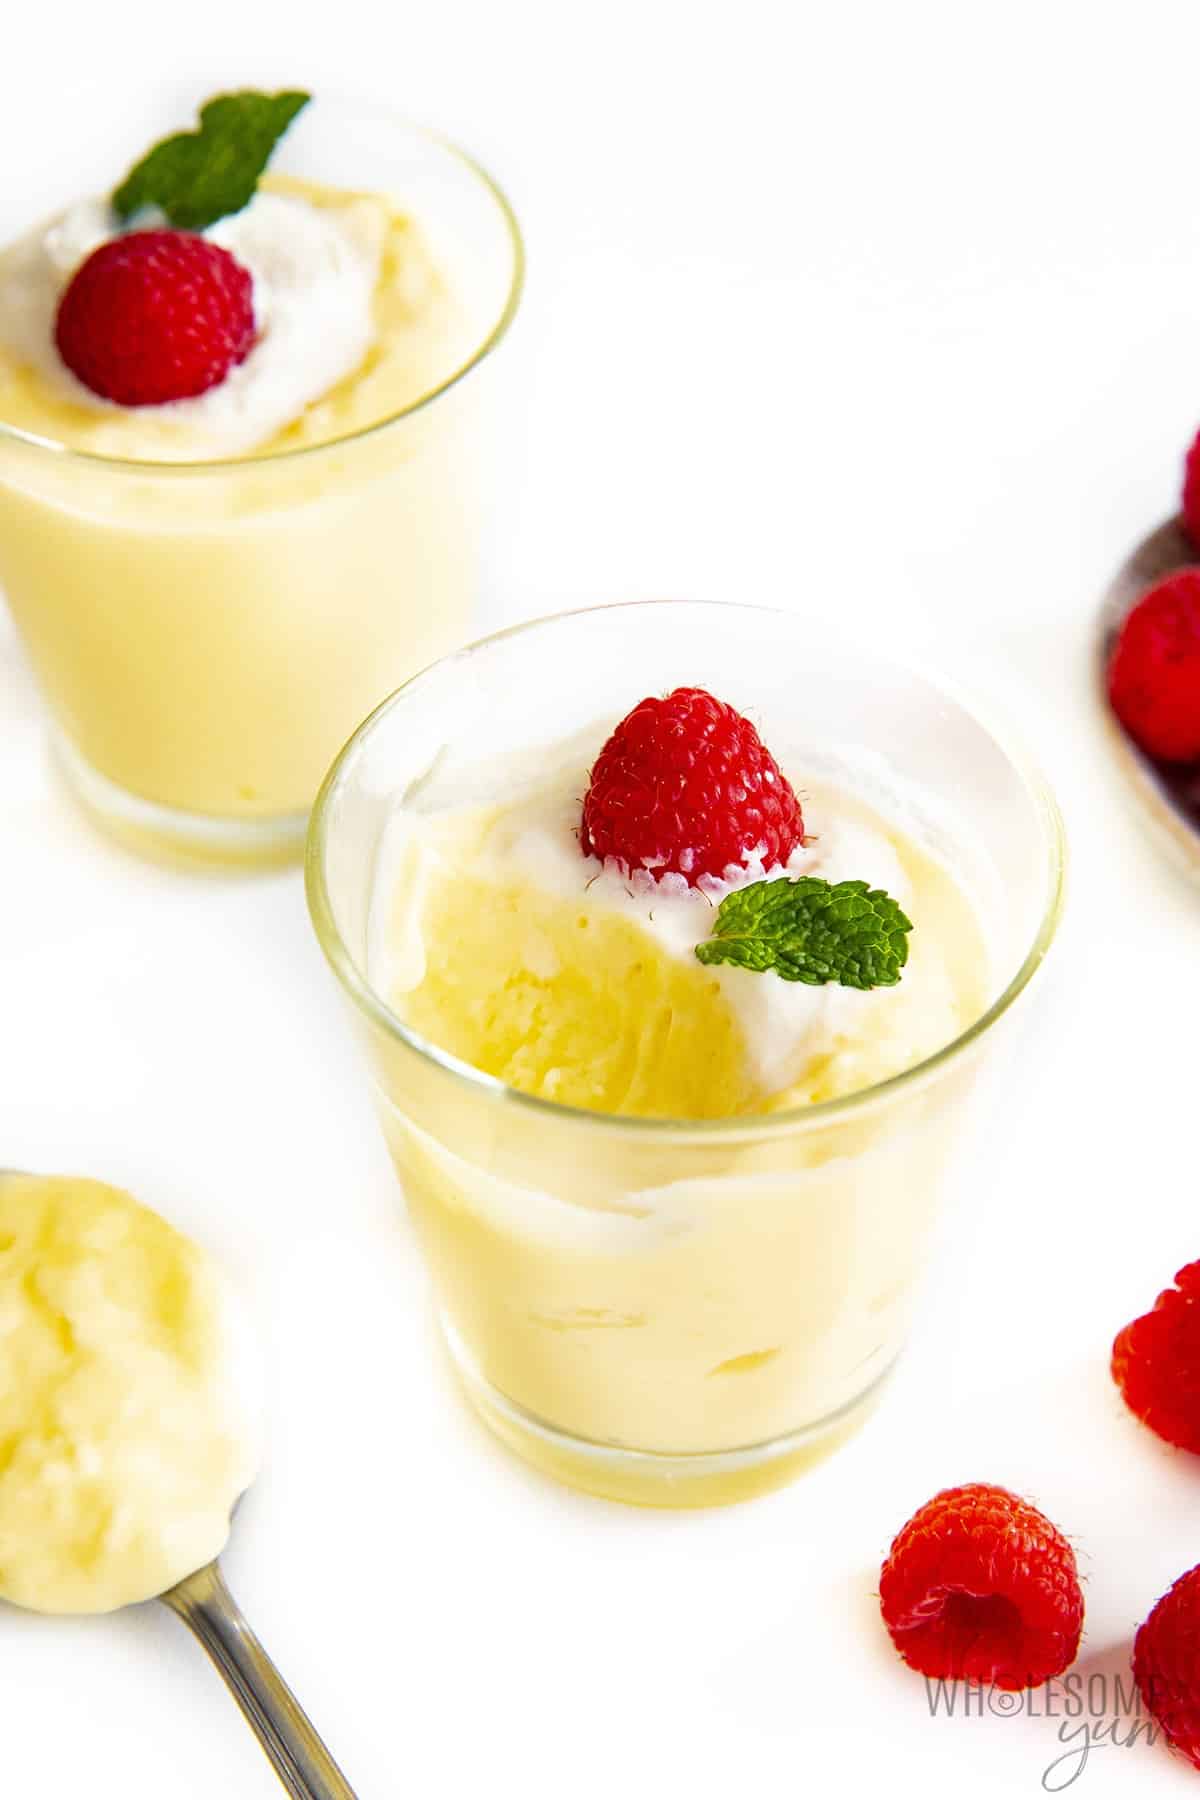 Keto vanilla pudding in a glass with a bite taken out.